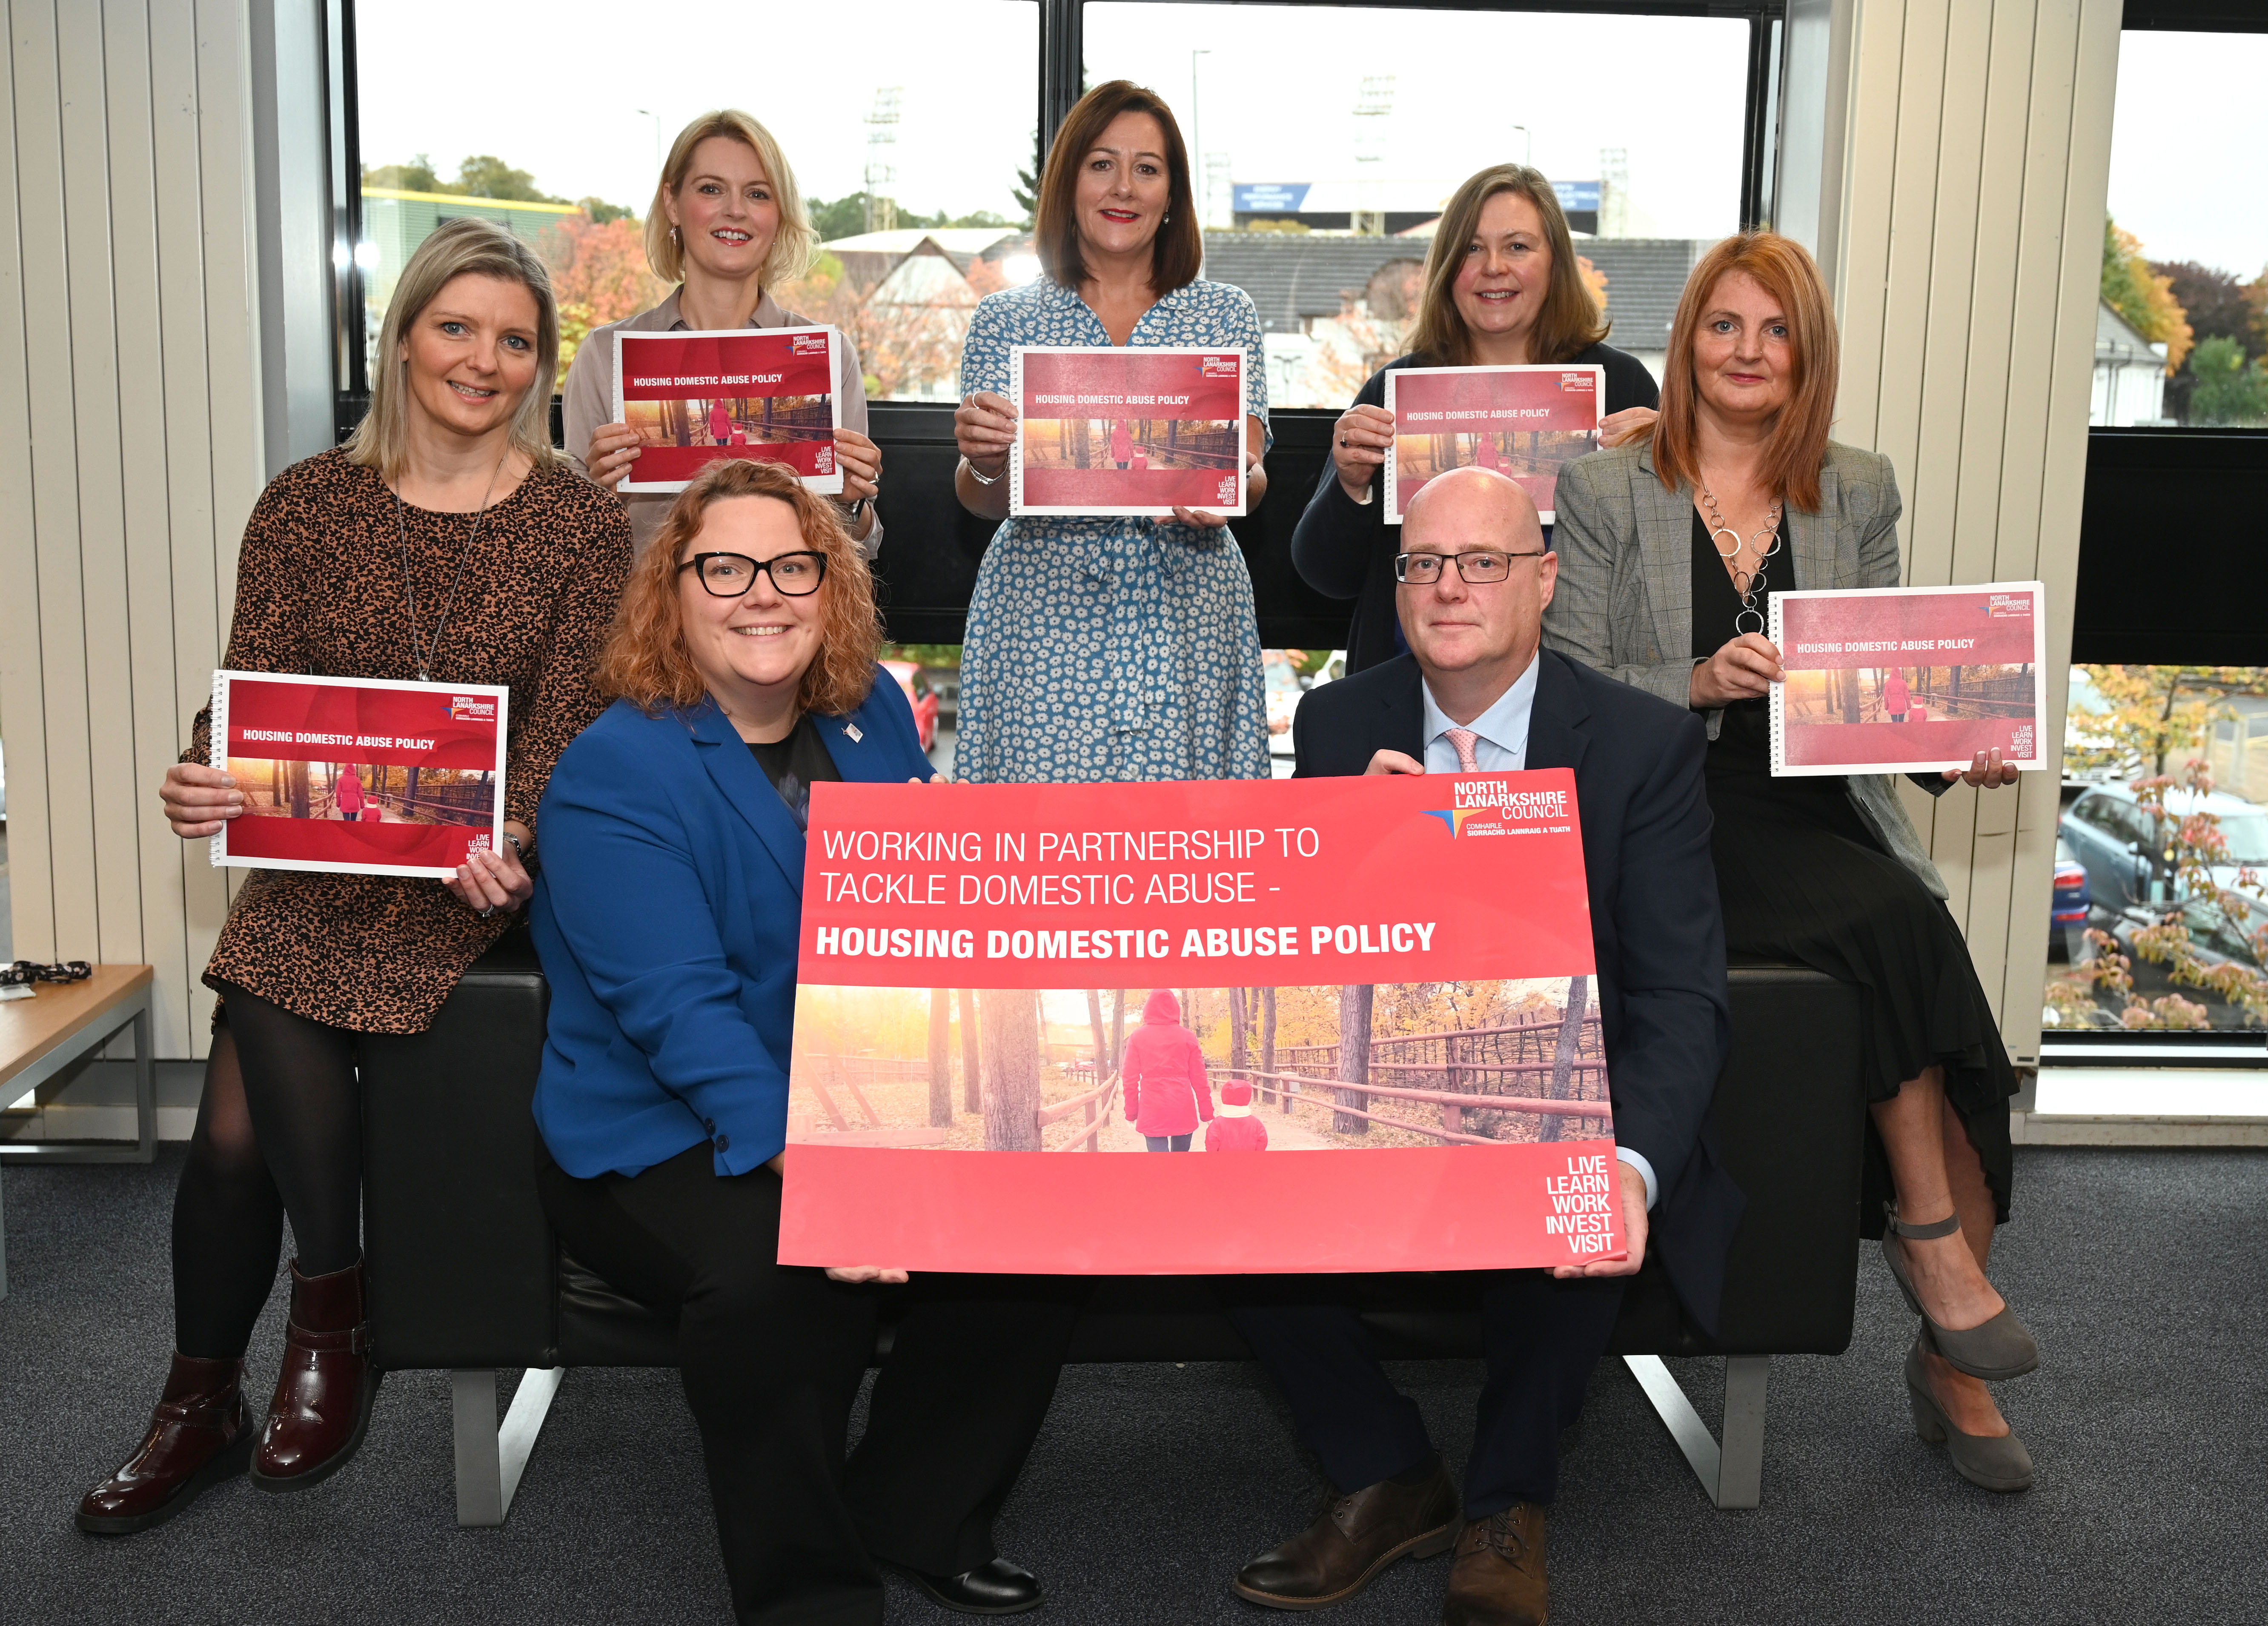 New North Lanarkshire housing policy tackles domestic abuse